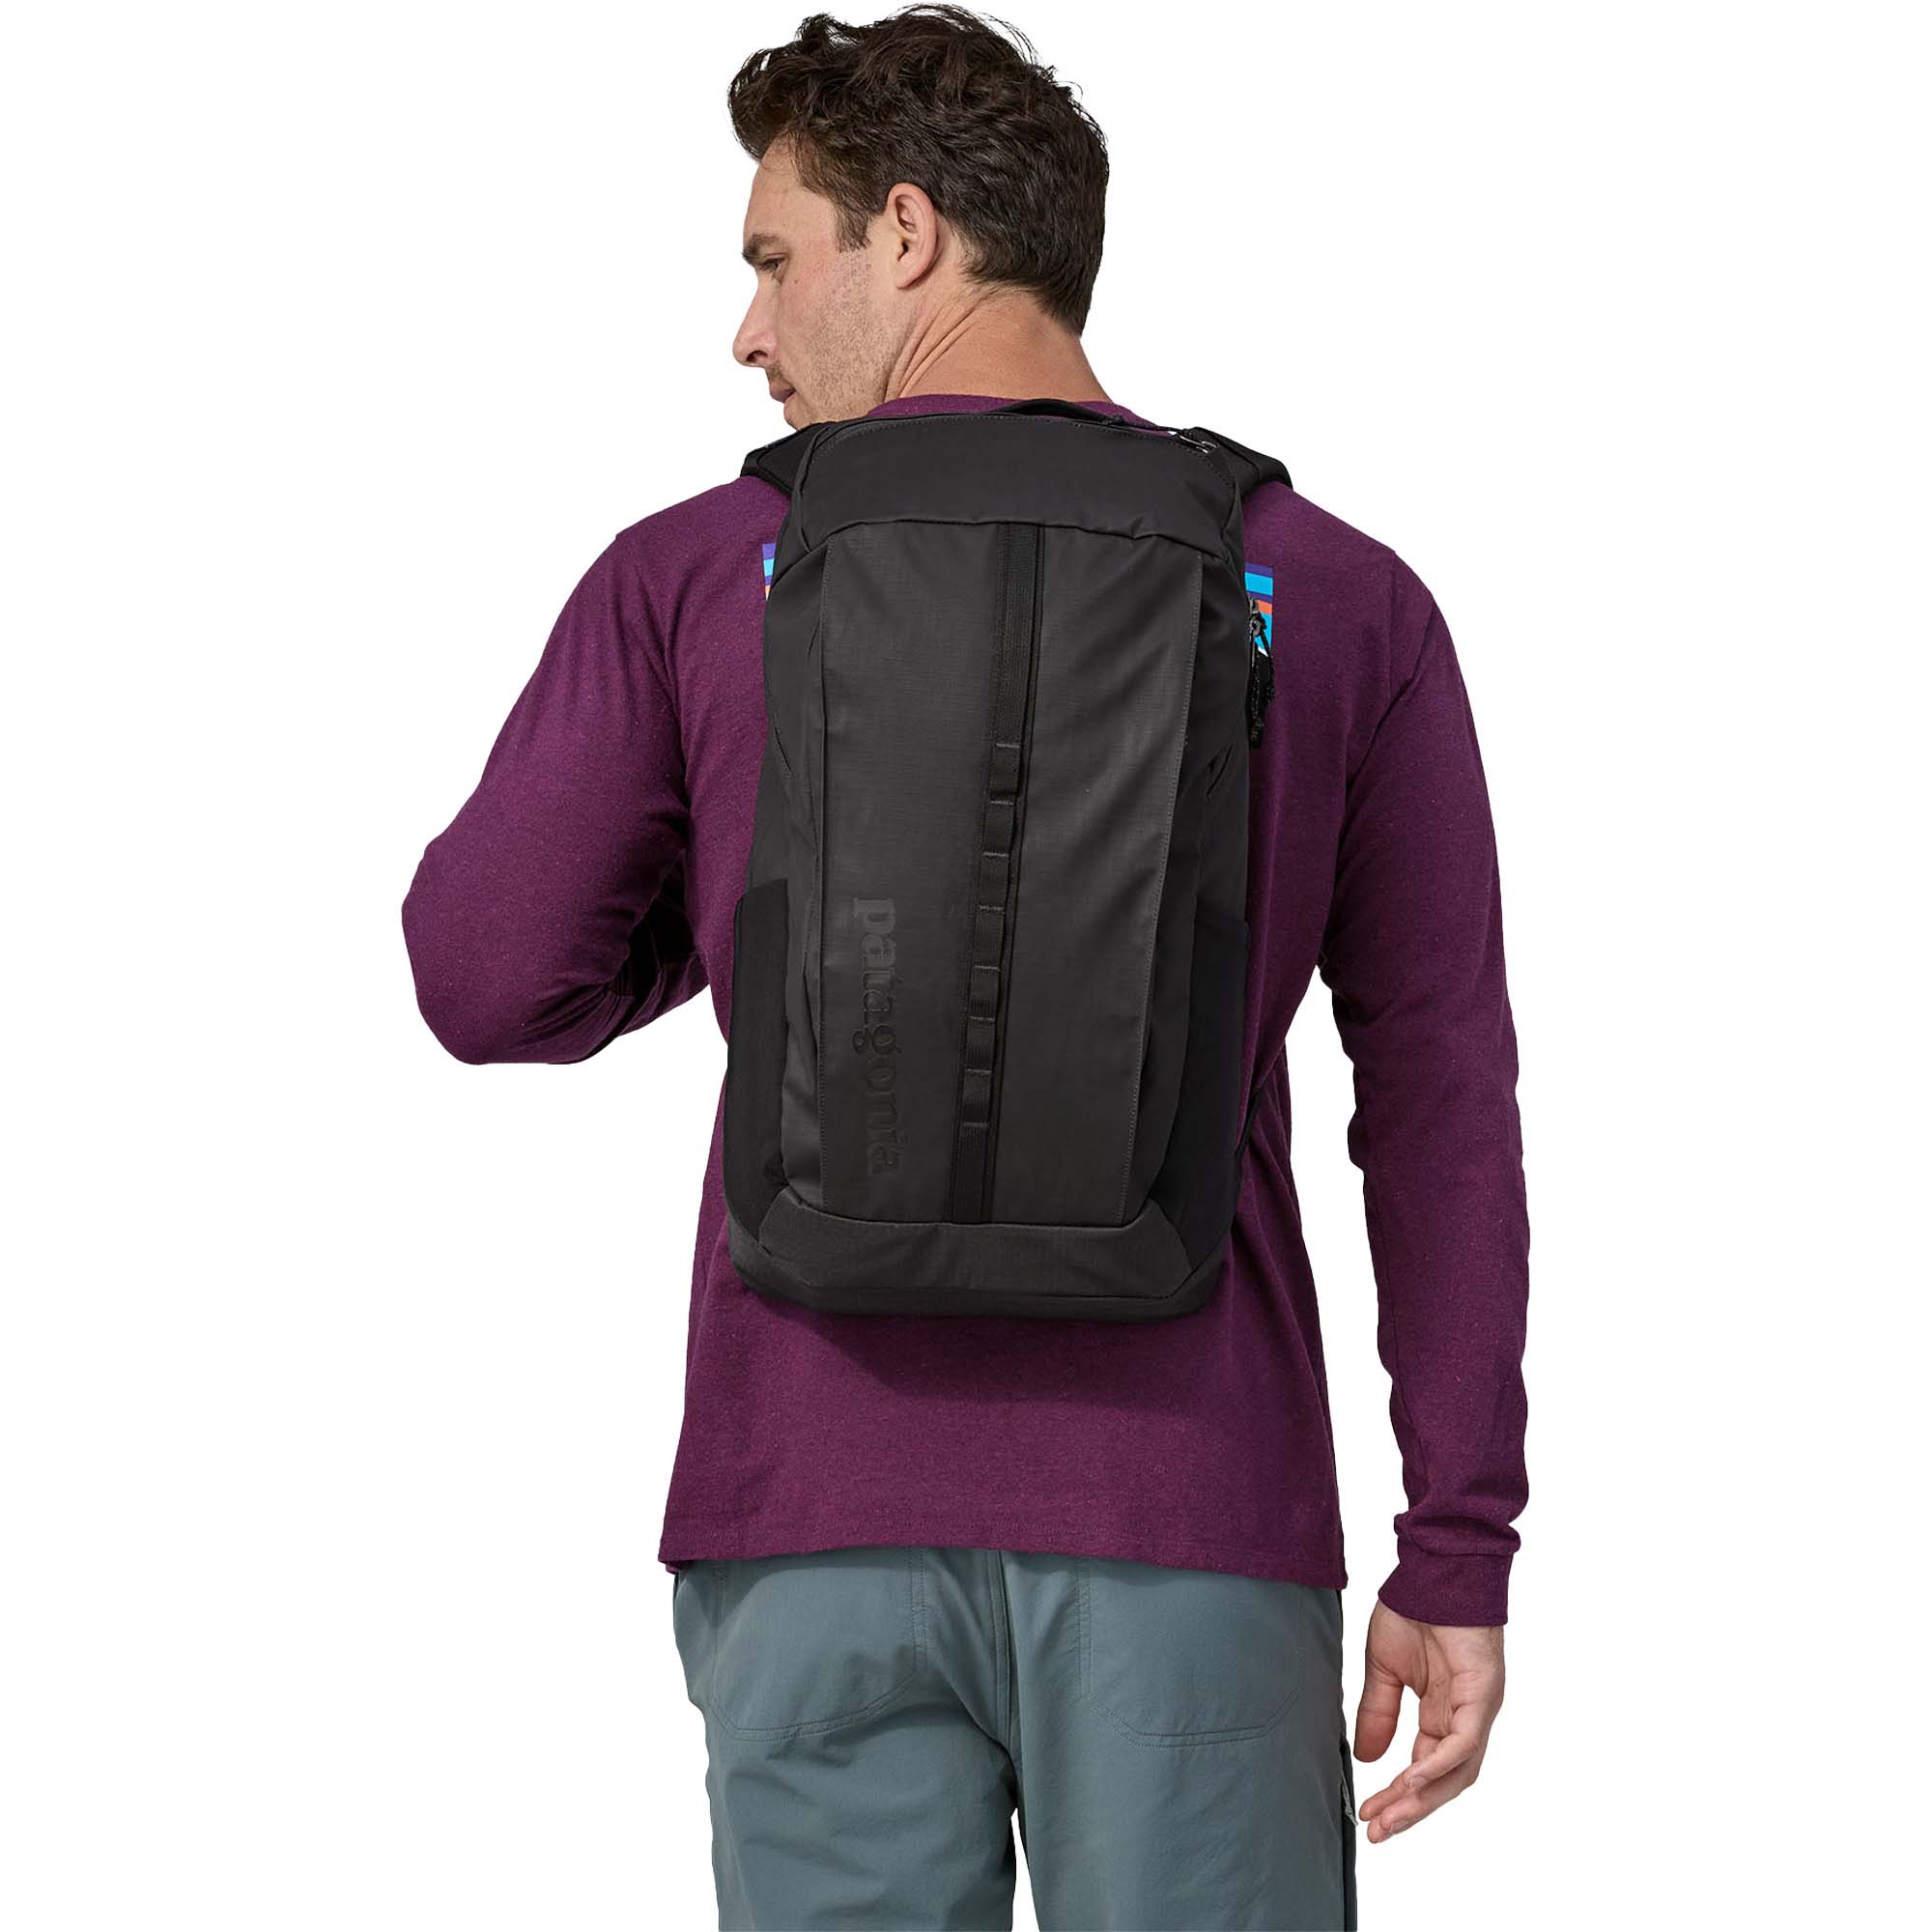 Patagonia Black Hole 25 Day Pack/Backpack